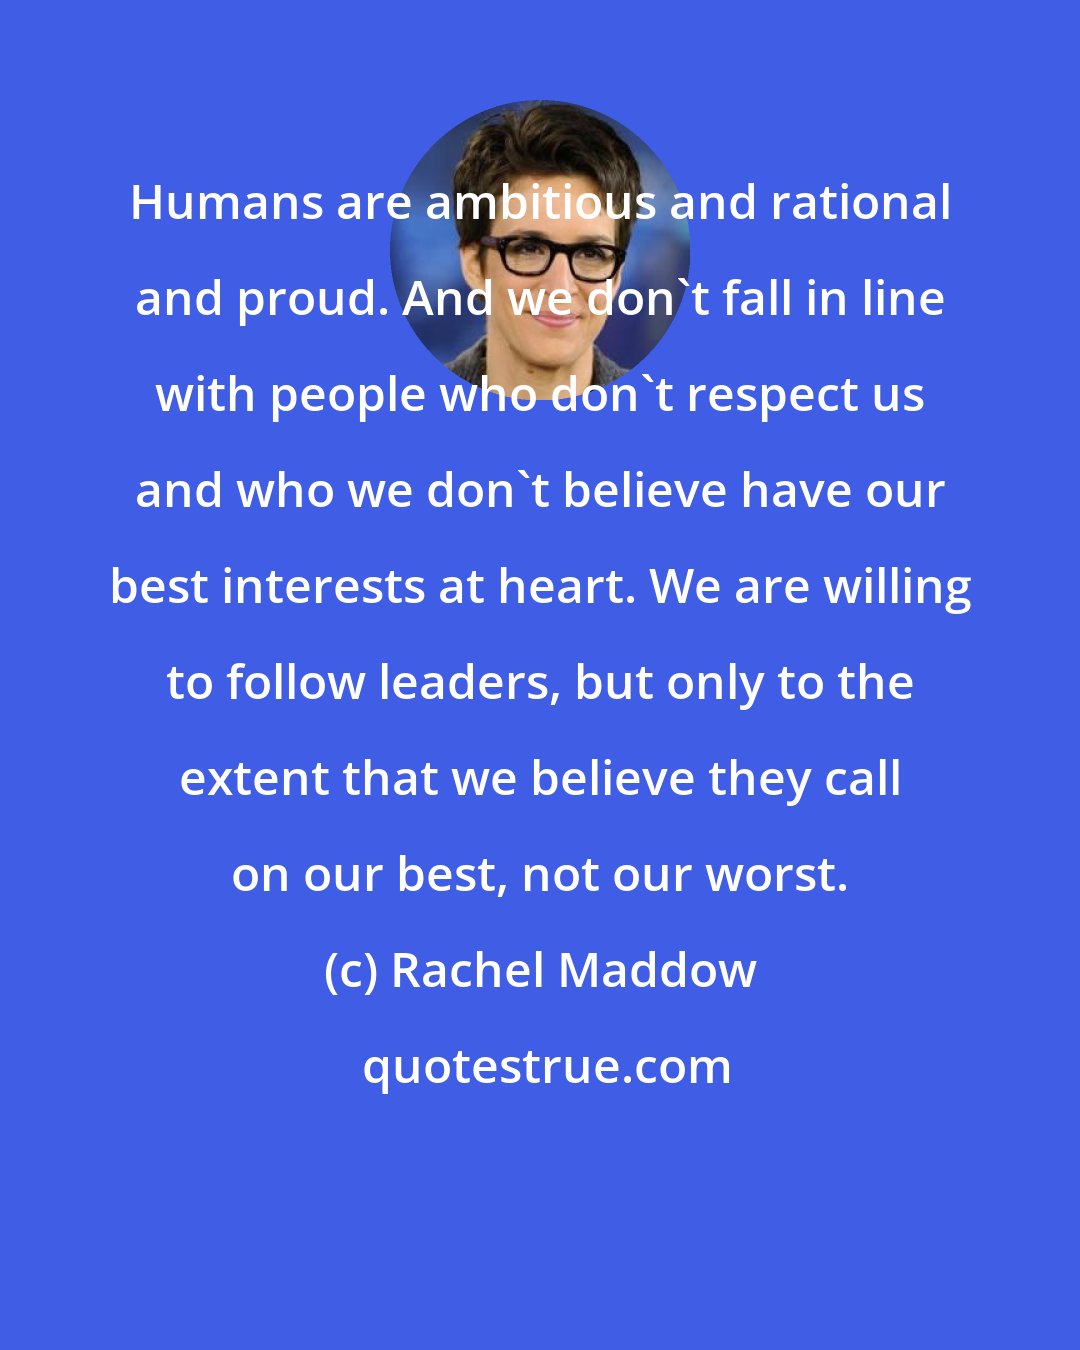 Rachel Maddow: Humans are ambitious and rational and proud. And we don't fall in line with people who don't respect us and who we don't believe have our best interests at heart. We are willing to follow leaders, but only to the extent that we believe they call on our best, not our worst.